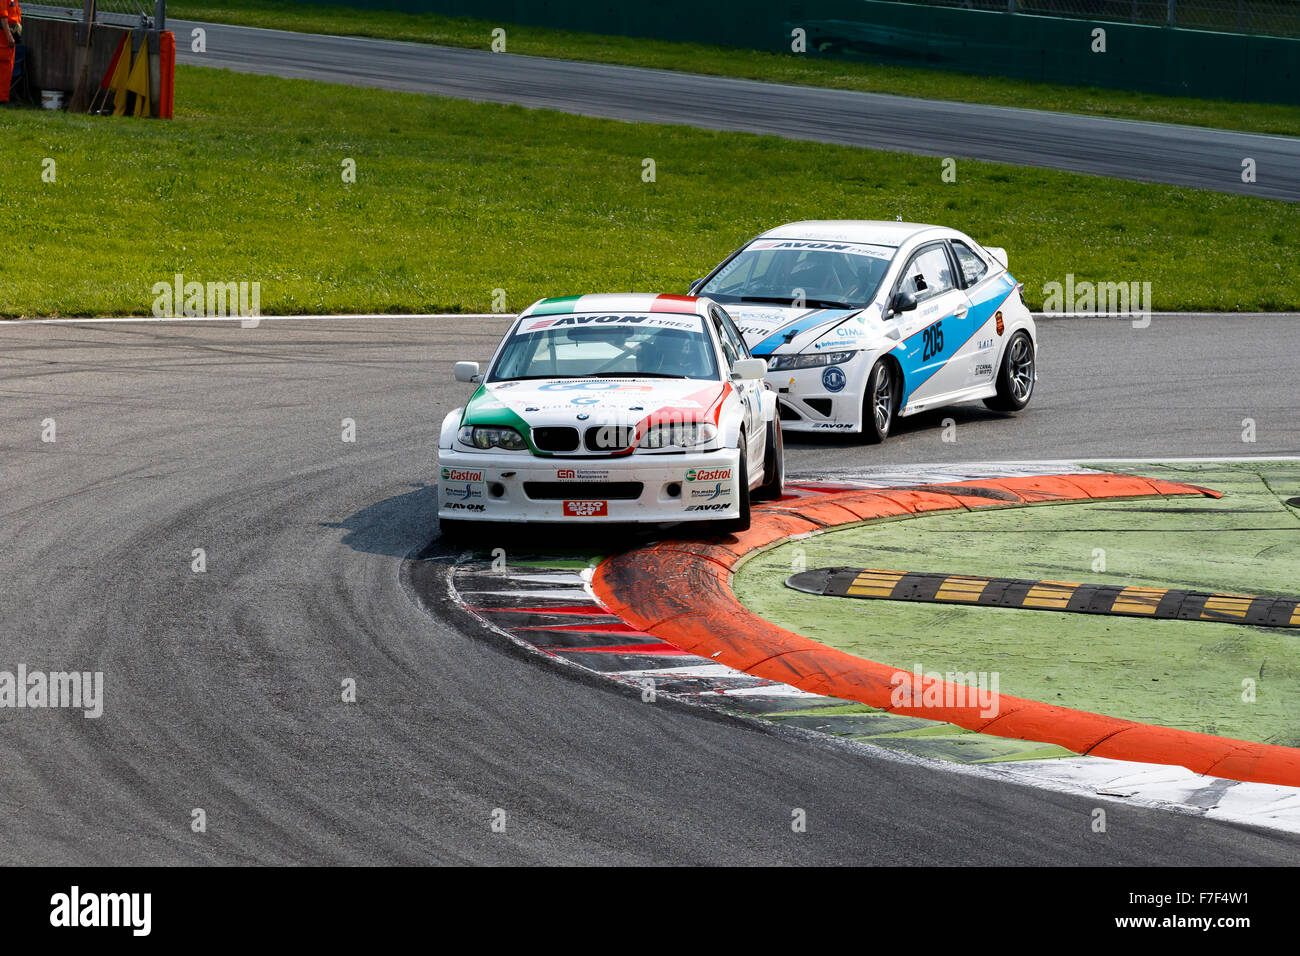 Monza, Italy - May 30, 2015: Bmw 320i of  Promotorsport team, driven  by ZANIN Filippo Maria during the C.I. Turismo Endurance Stock Photo